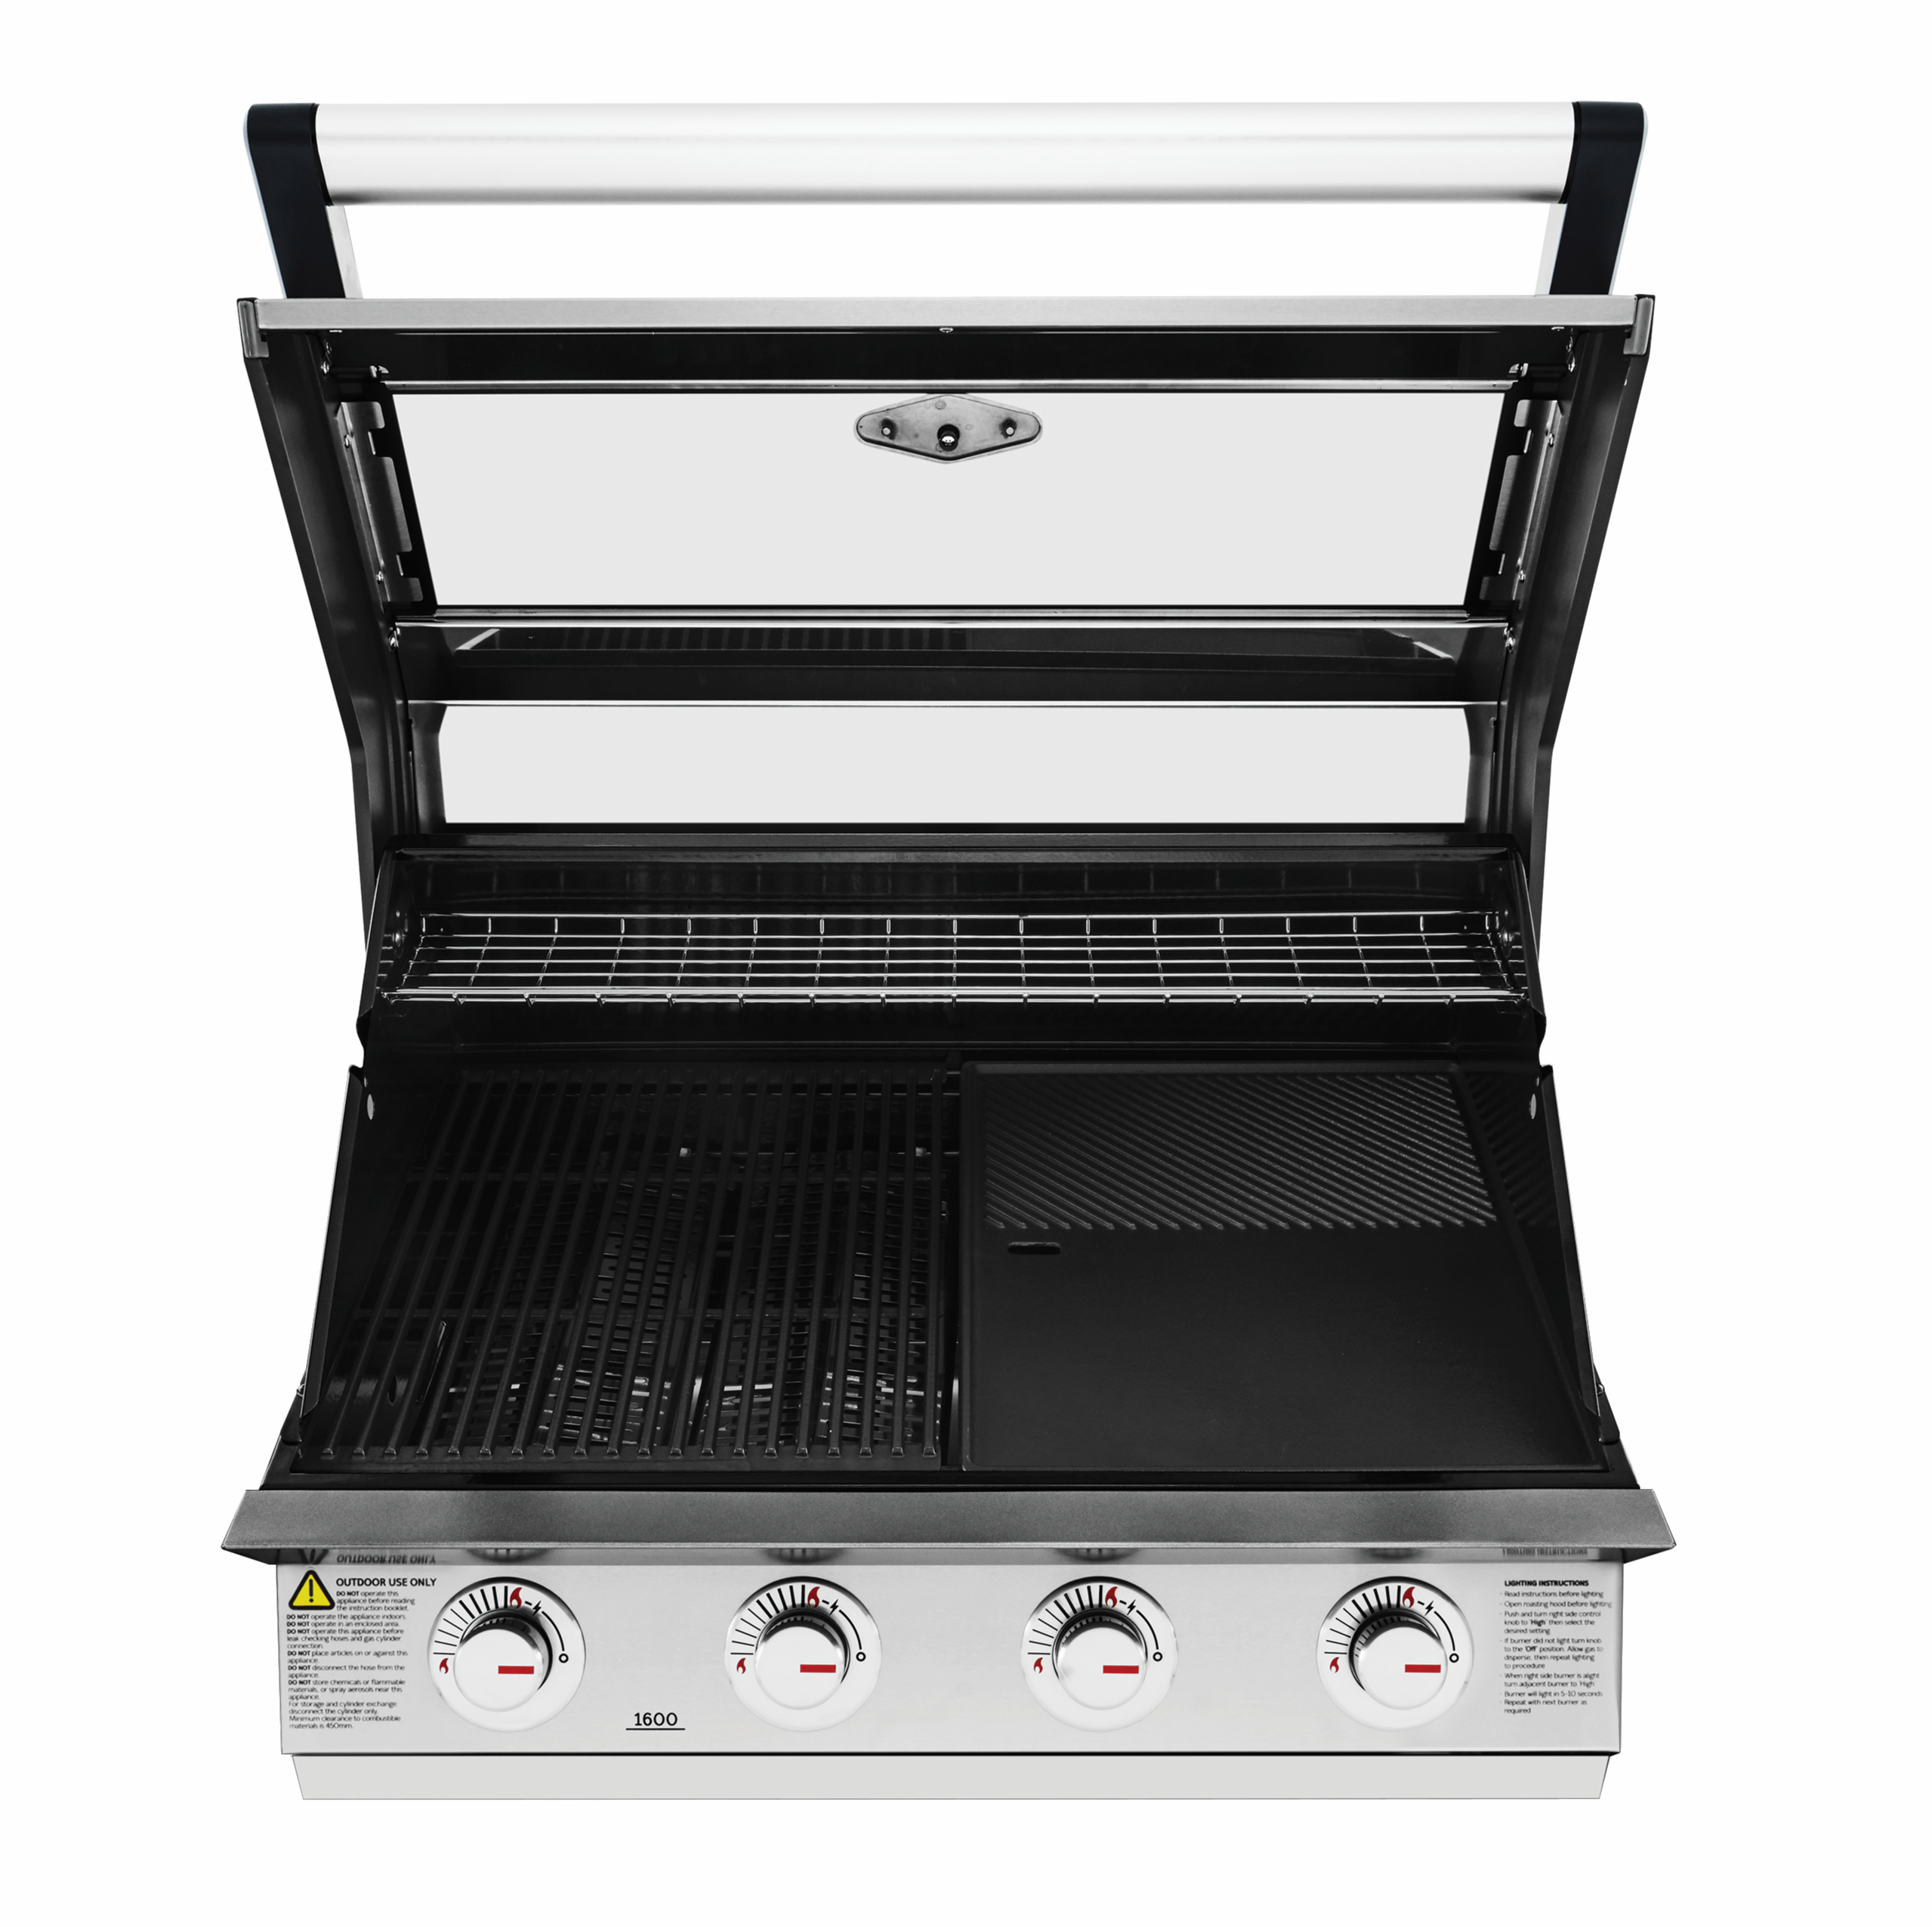 BeefEater - 1600S Series 4 Burner Built In Barbecue